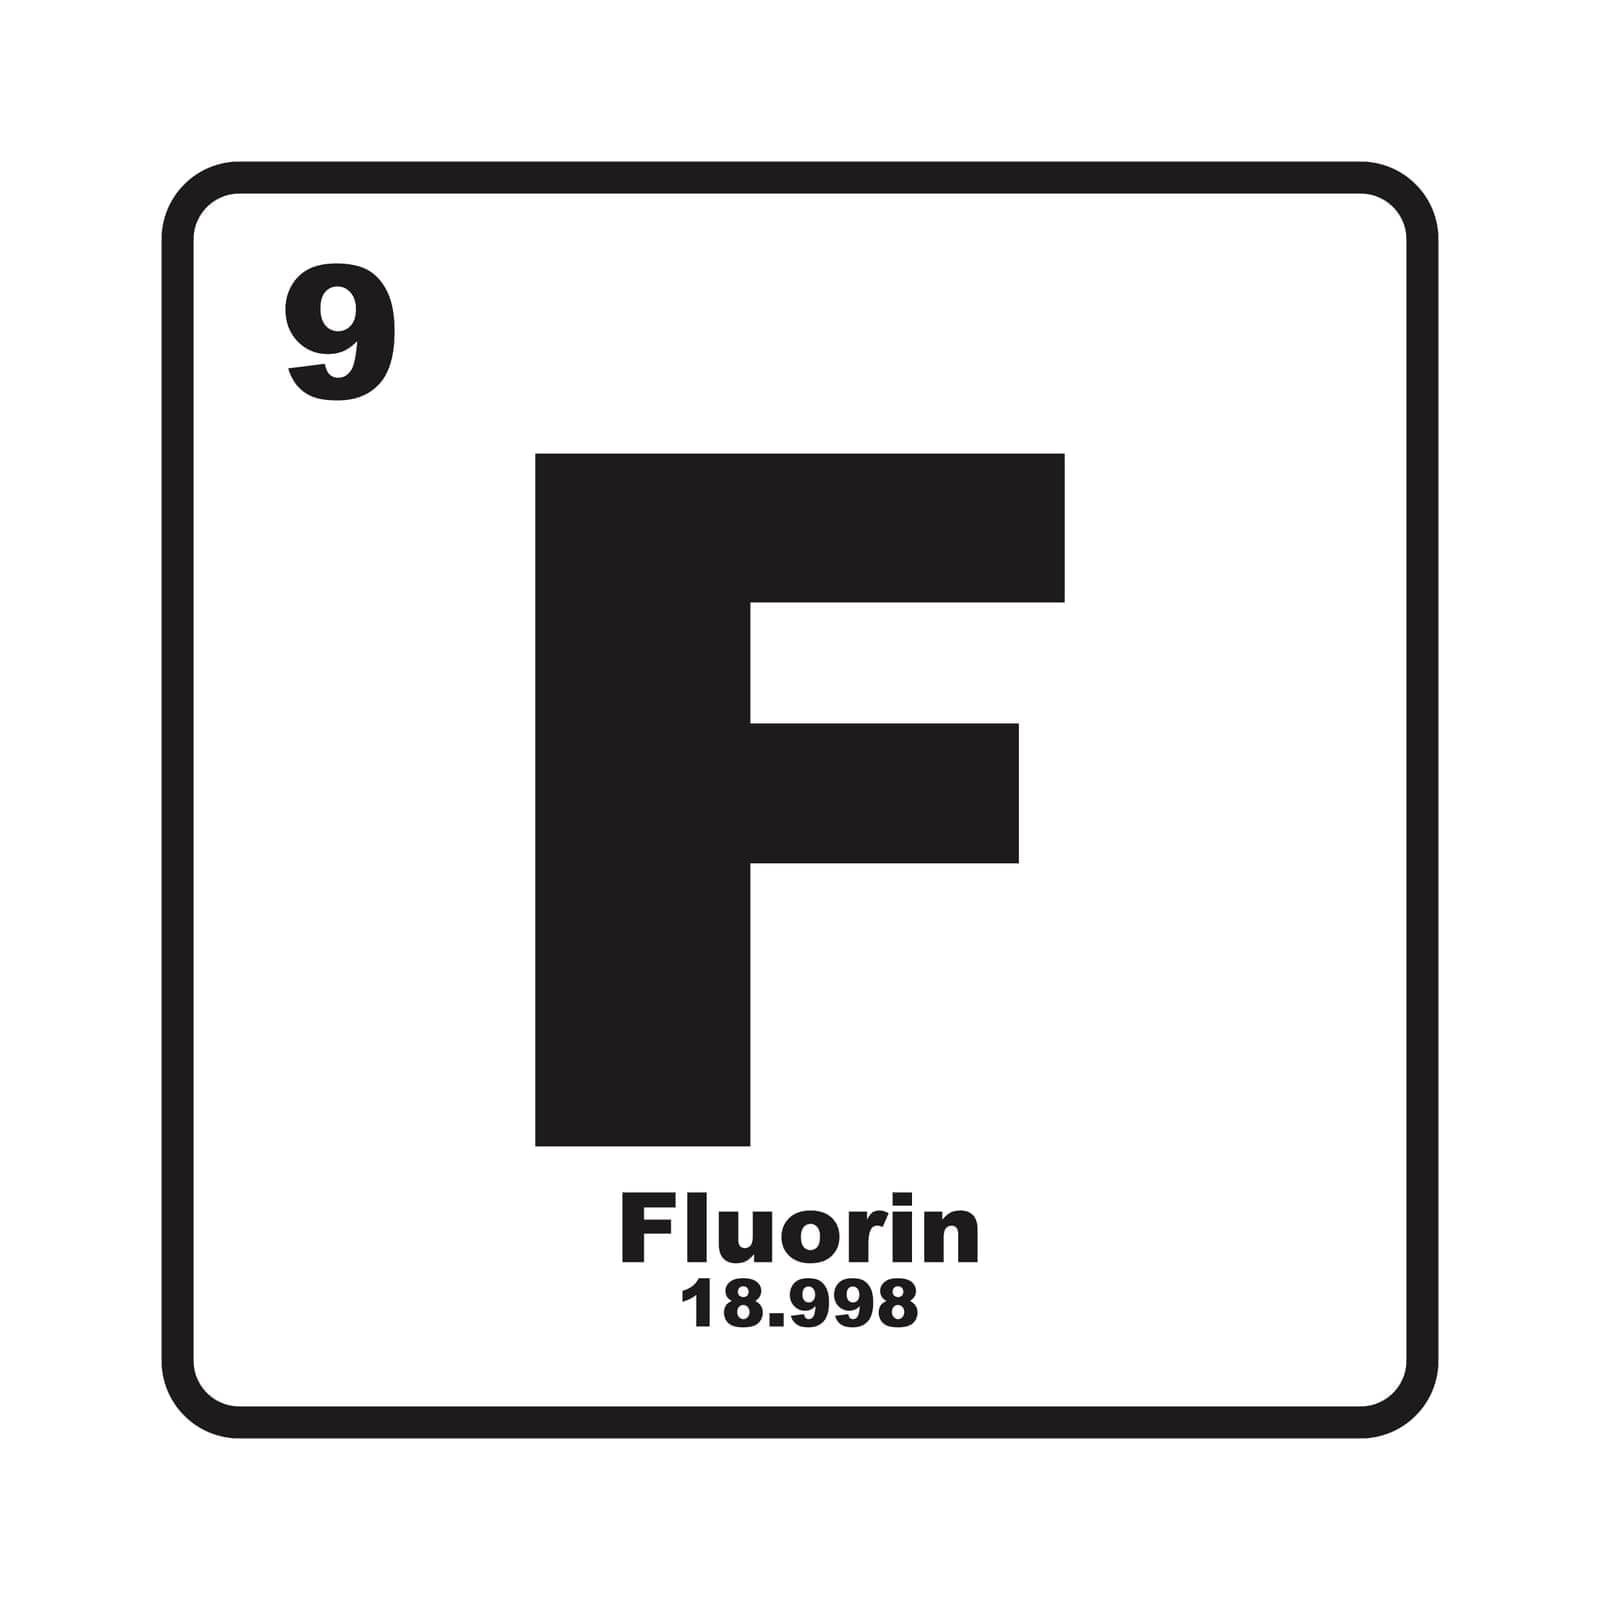 Fluorin icon, chemical element in the periodic table.